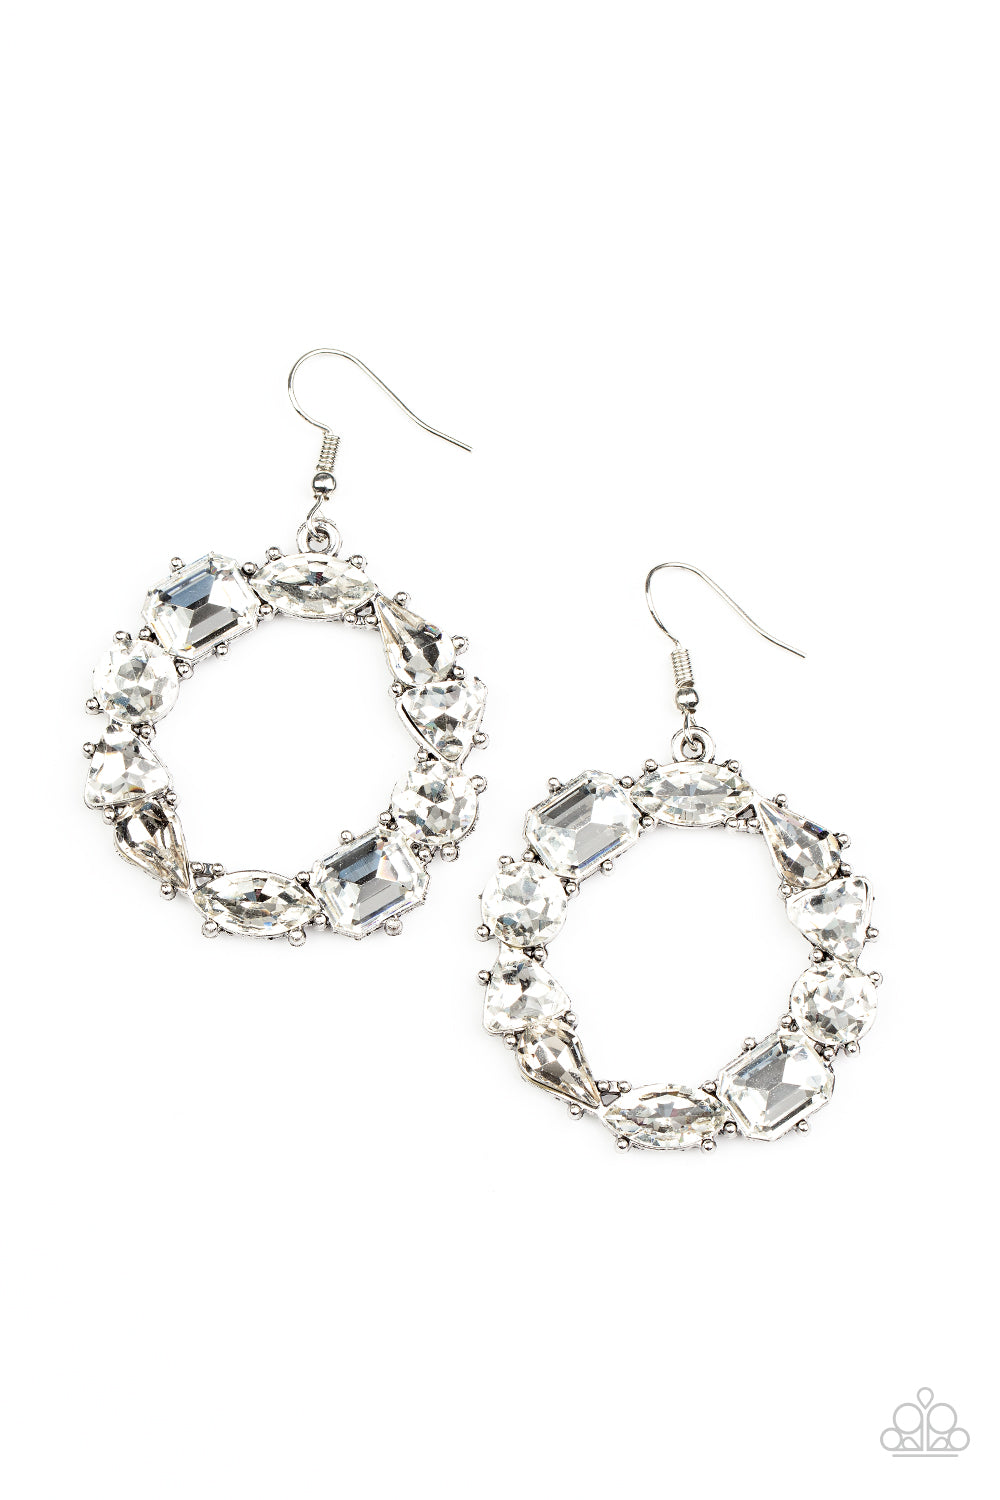 ​GLOWING in Circles - White Sparkle - Silver  Earrings - Paparazzi Accessories - Featuring glistening silver fittings, a regal assortment of round, triangular, teardrop, marquise, and emerald cut white rhinestones delicately coalesce into a jaw-dropping hoop. Earring attaches to a standard fishhook fitting.
Sold as one pair of earrings.
